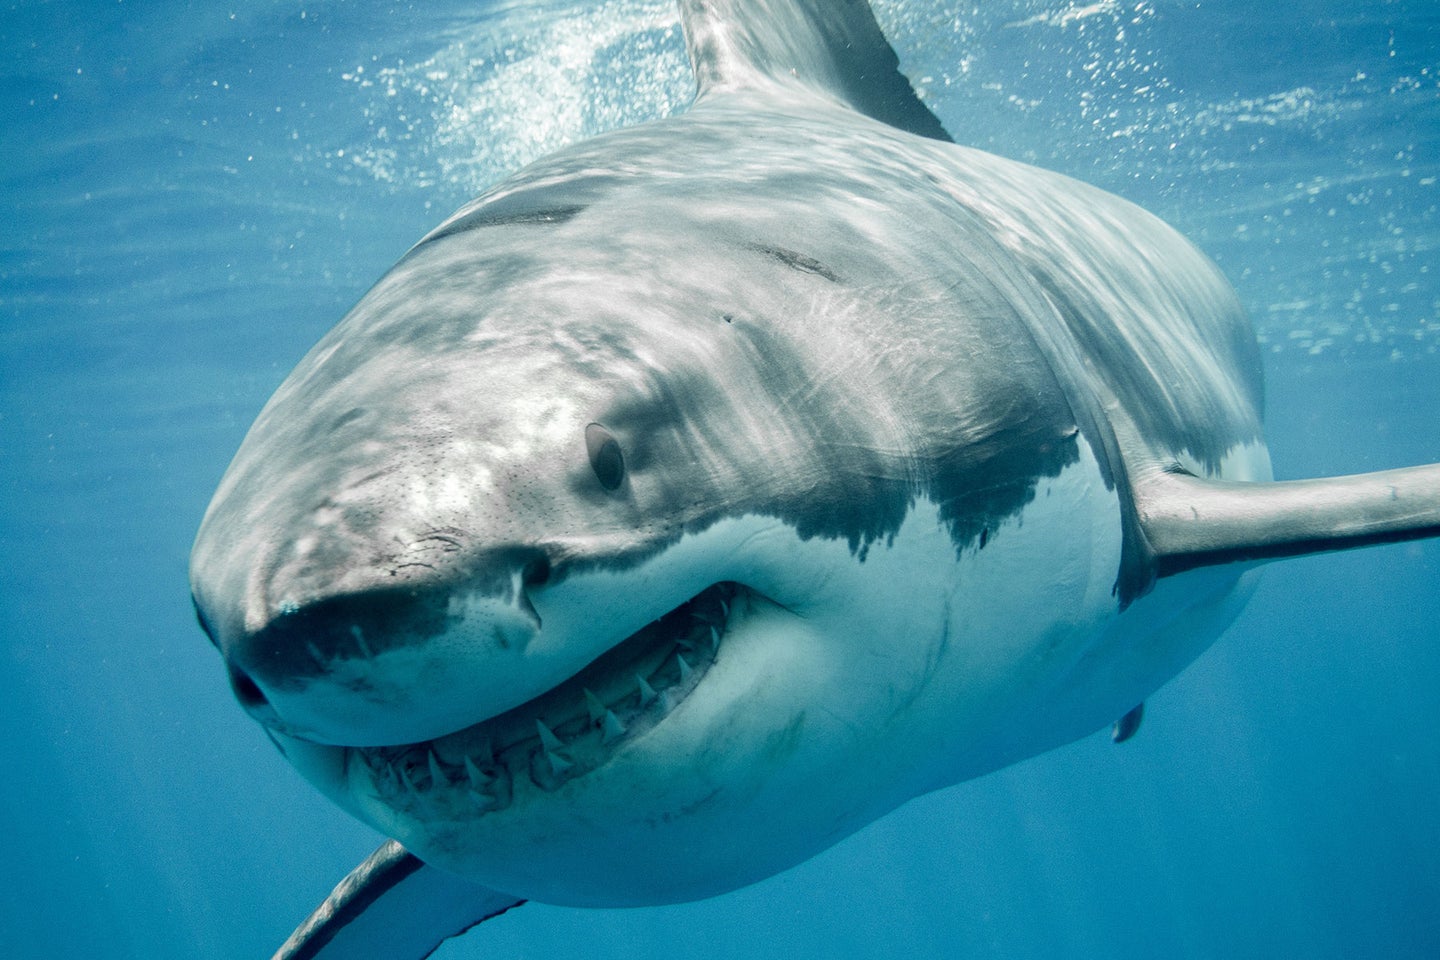 Photos: These 'Baby' Great White Sharks Were Just Released Off